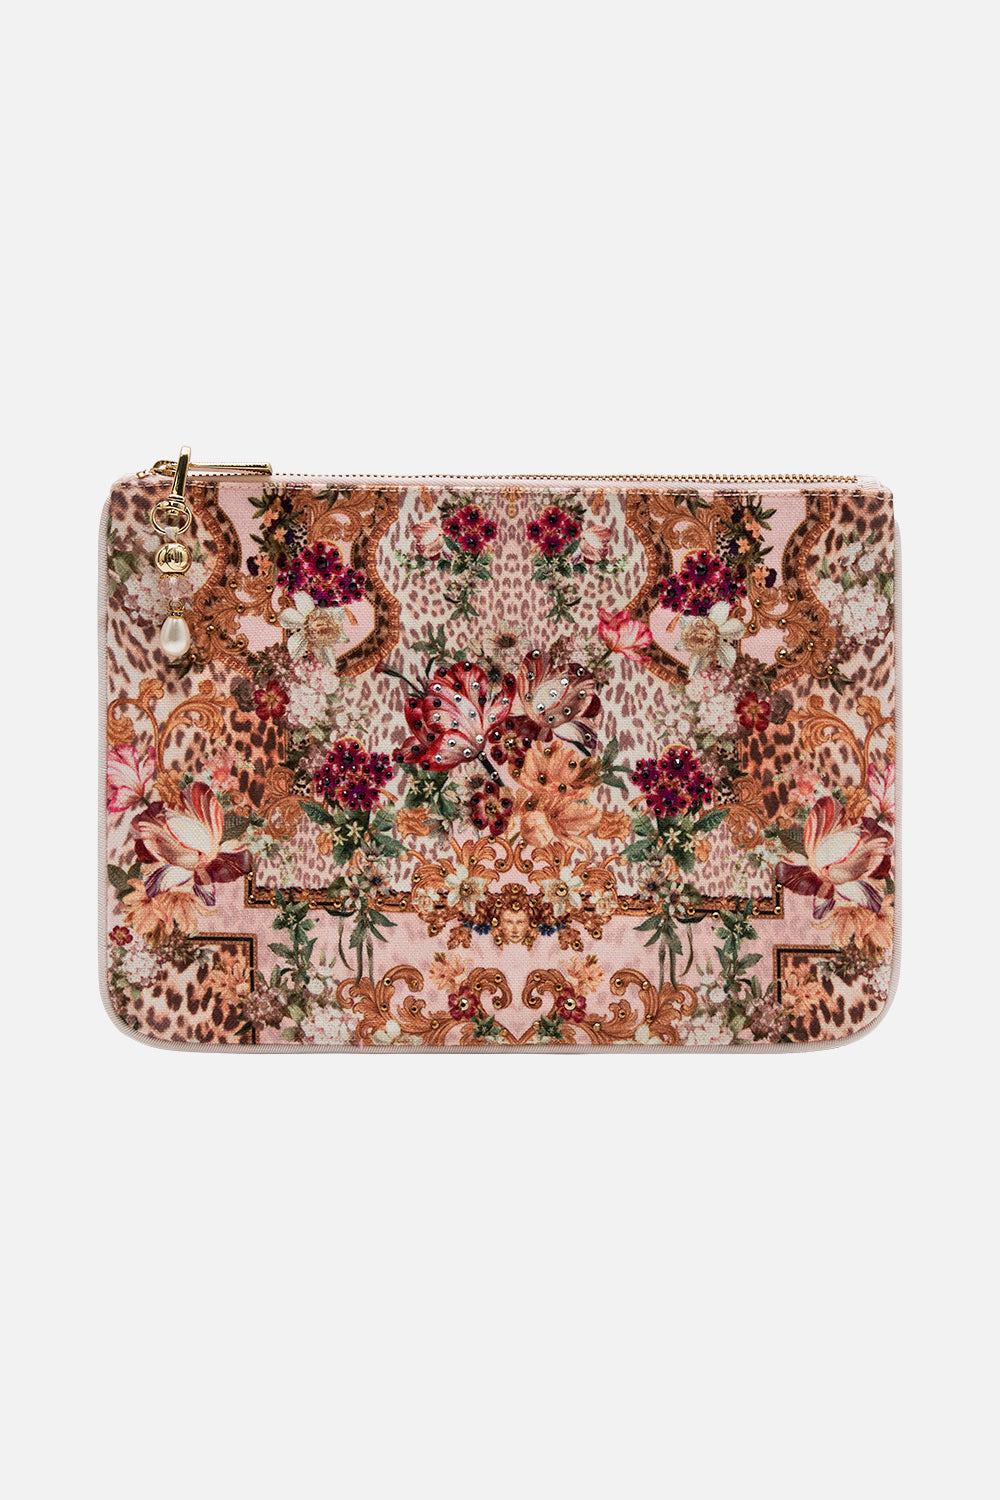 Product view of CAMILLA small clutch in Bambino Bliss print